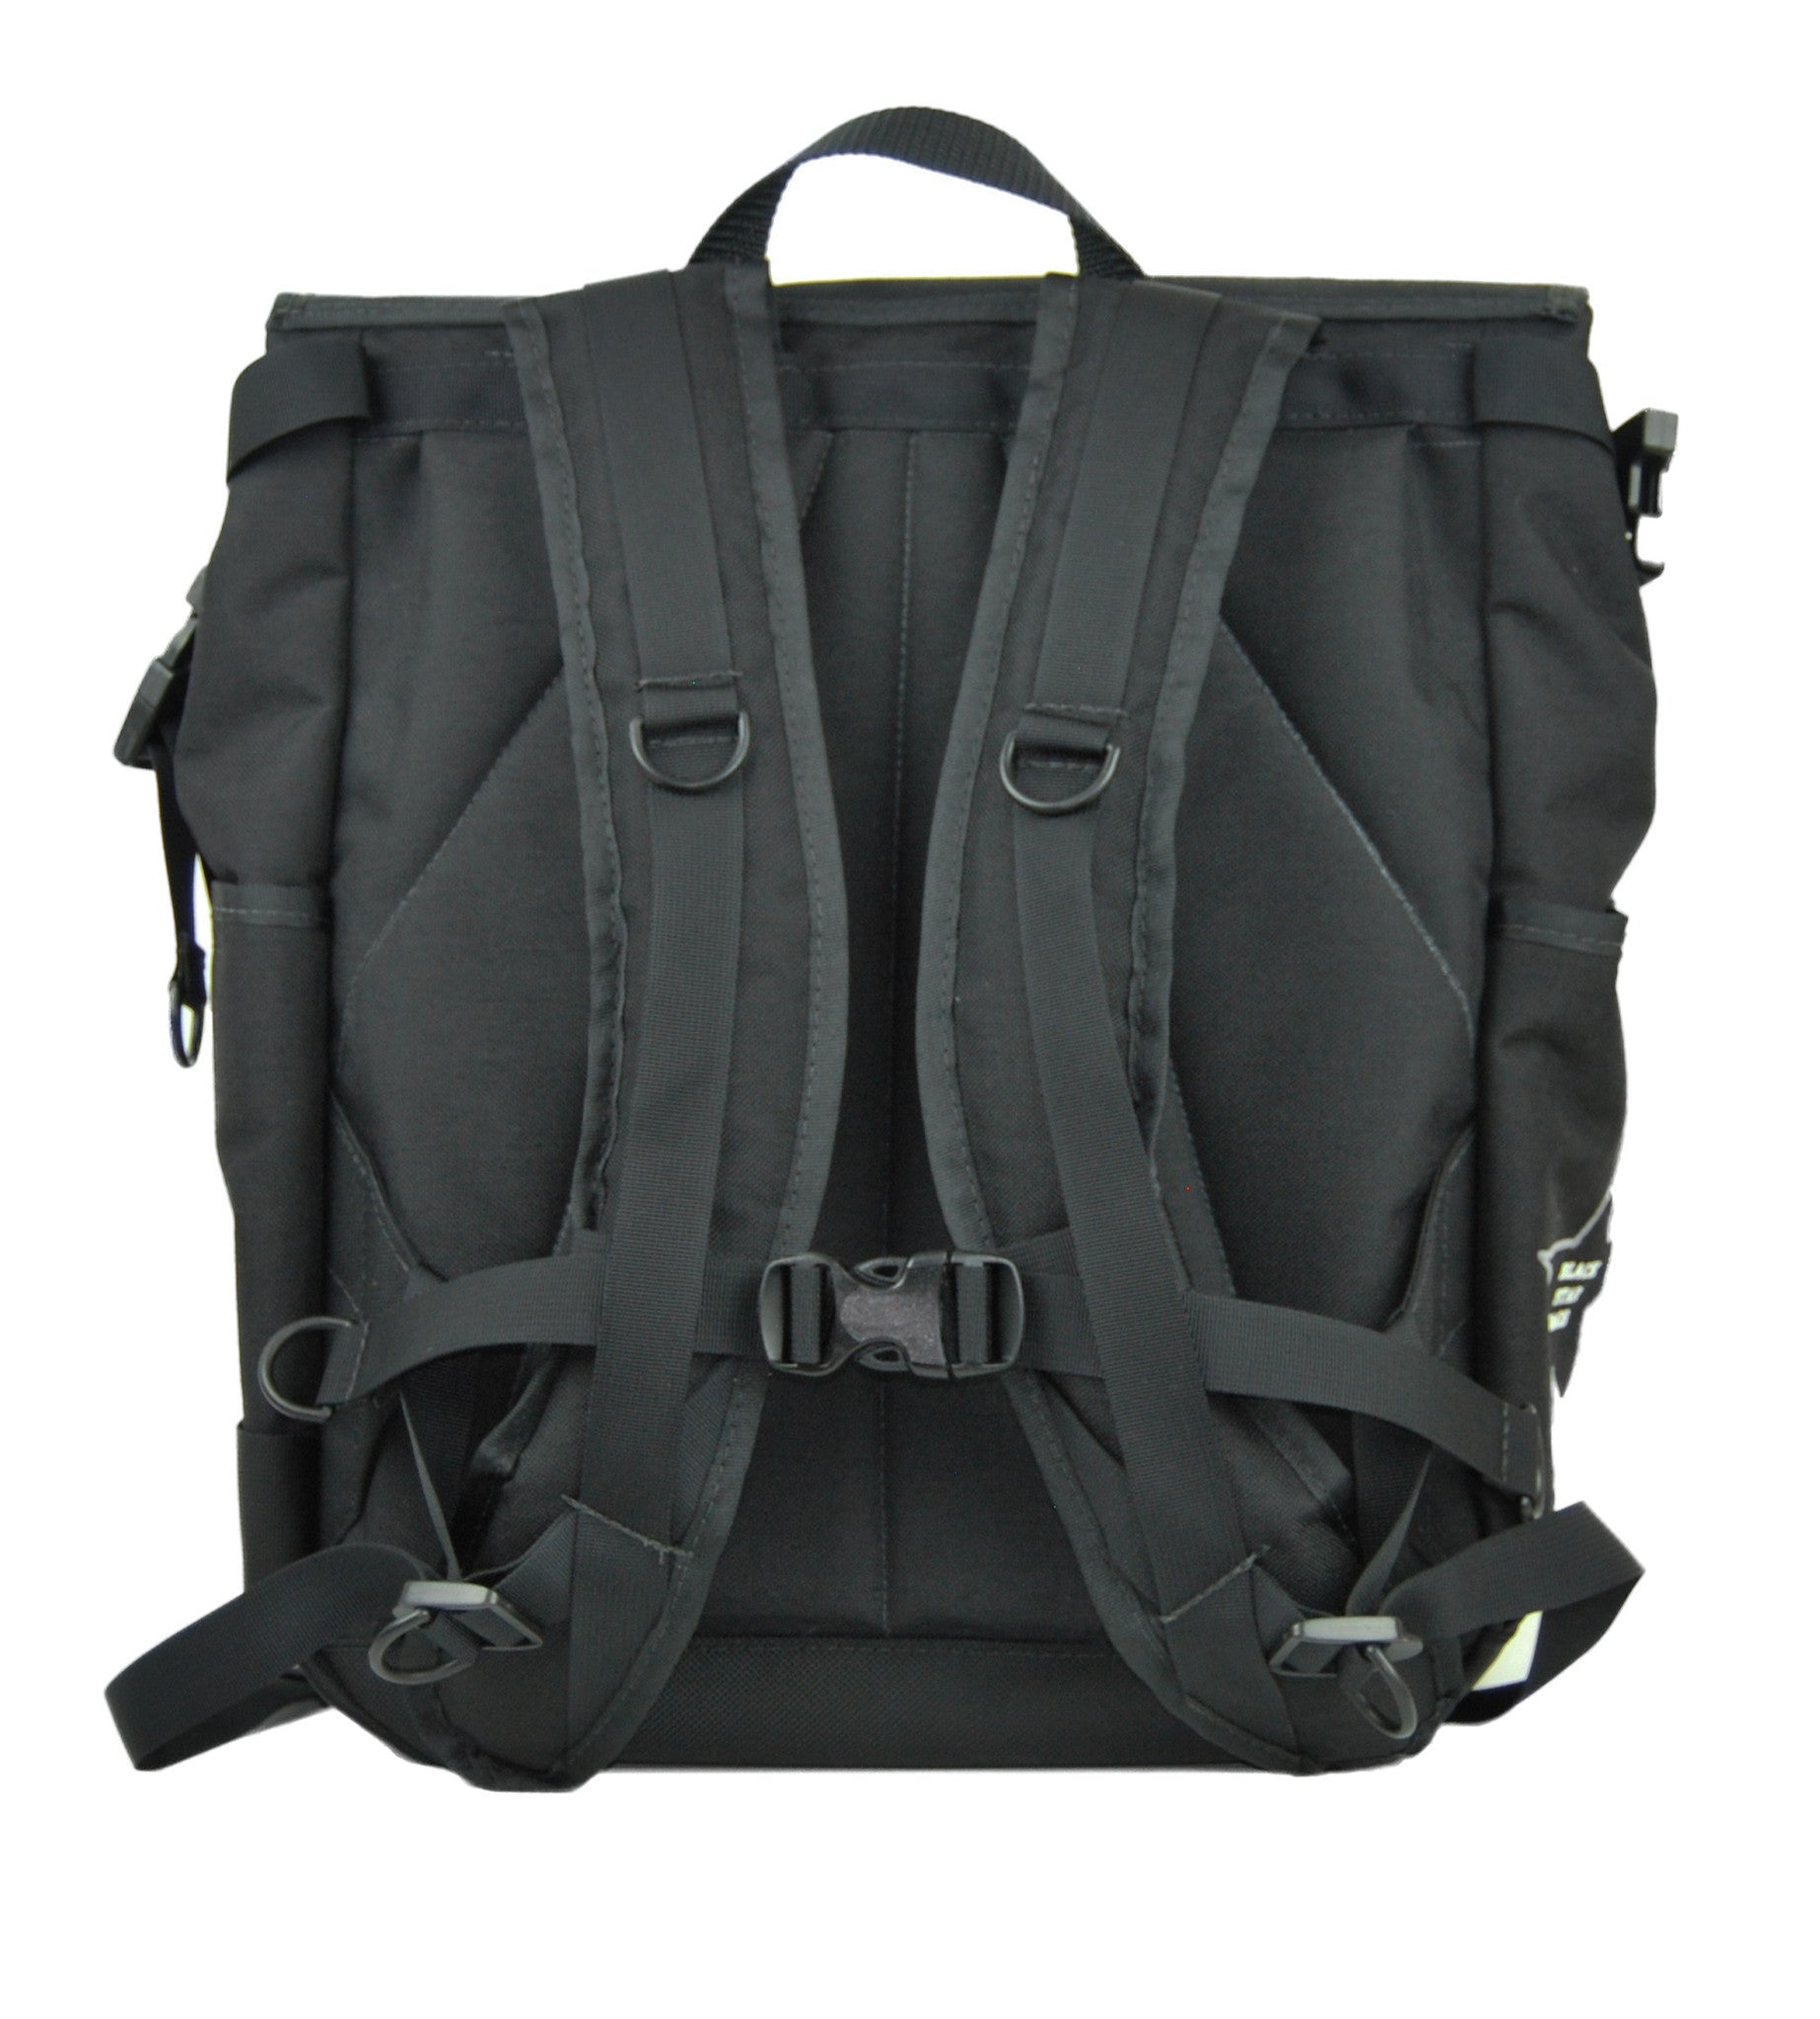 Black Roll Top Backpack With Silver Lining